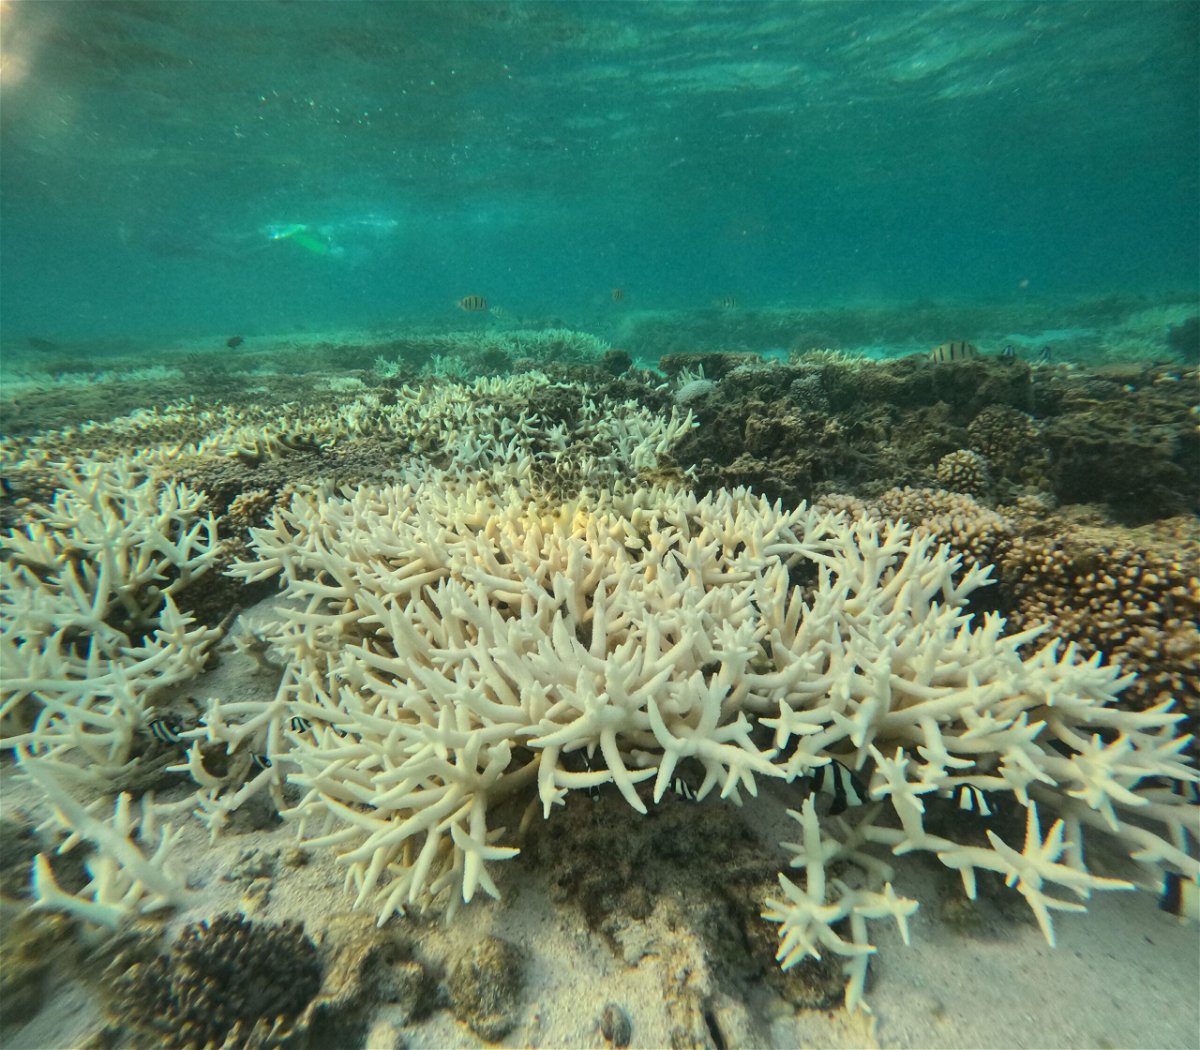 <i>Bex Wright/CNN via CNN Newsource</i><br/>Coral bleaching in the lagoon of the Great Barrier Reef's Lady Elliot Island